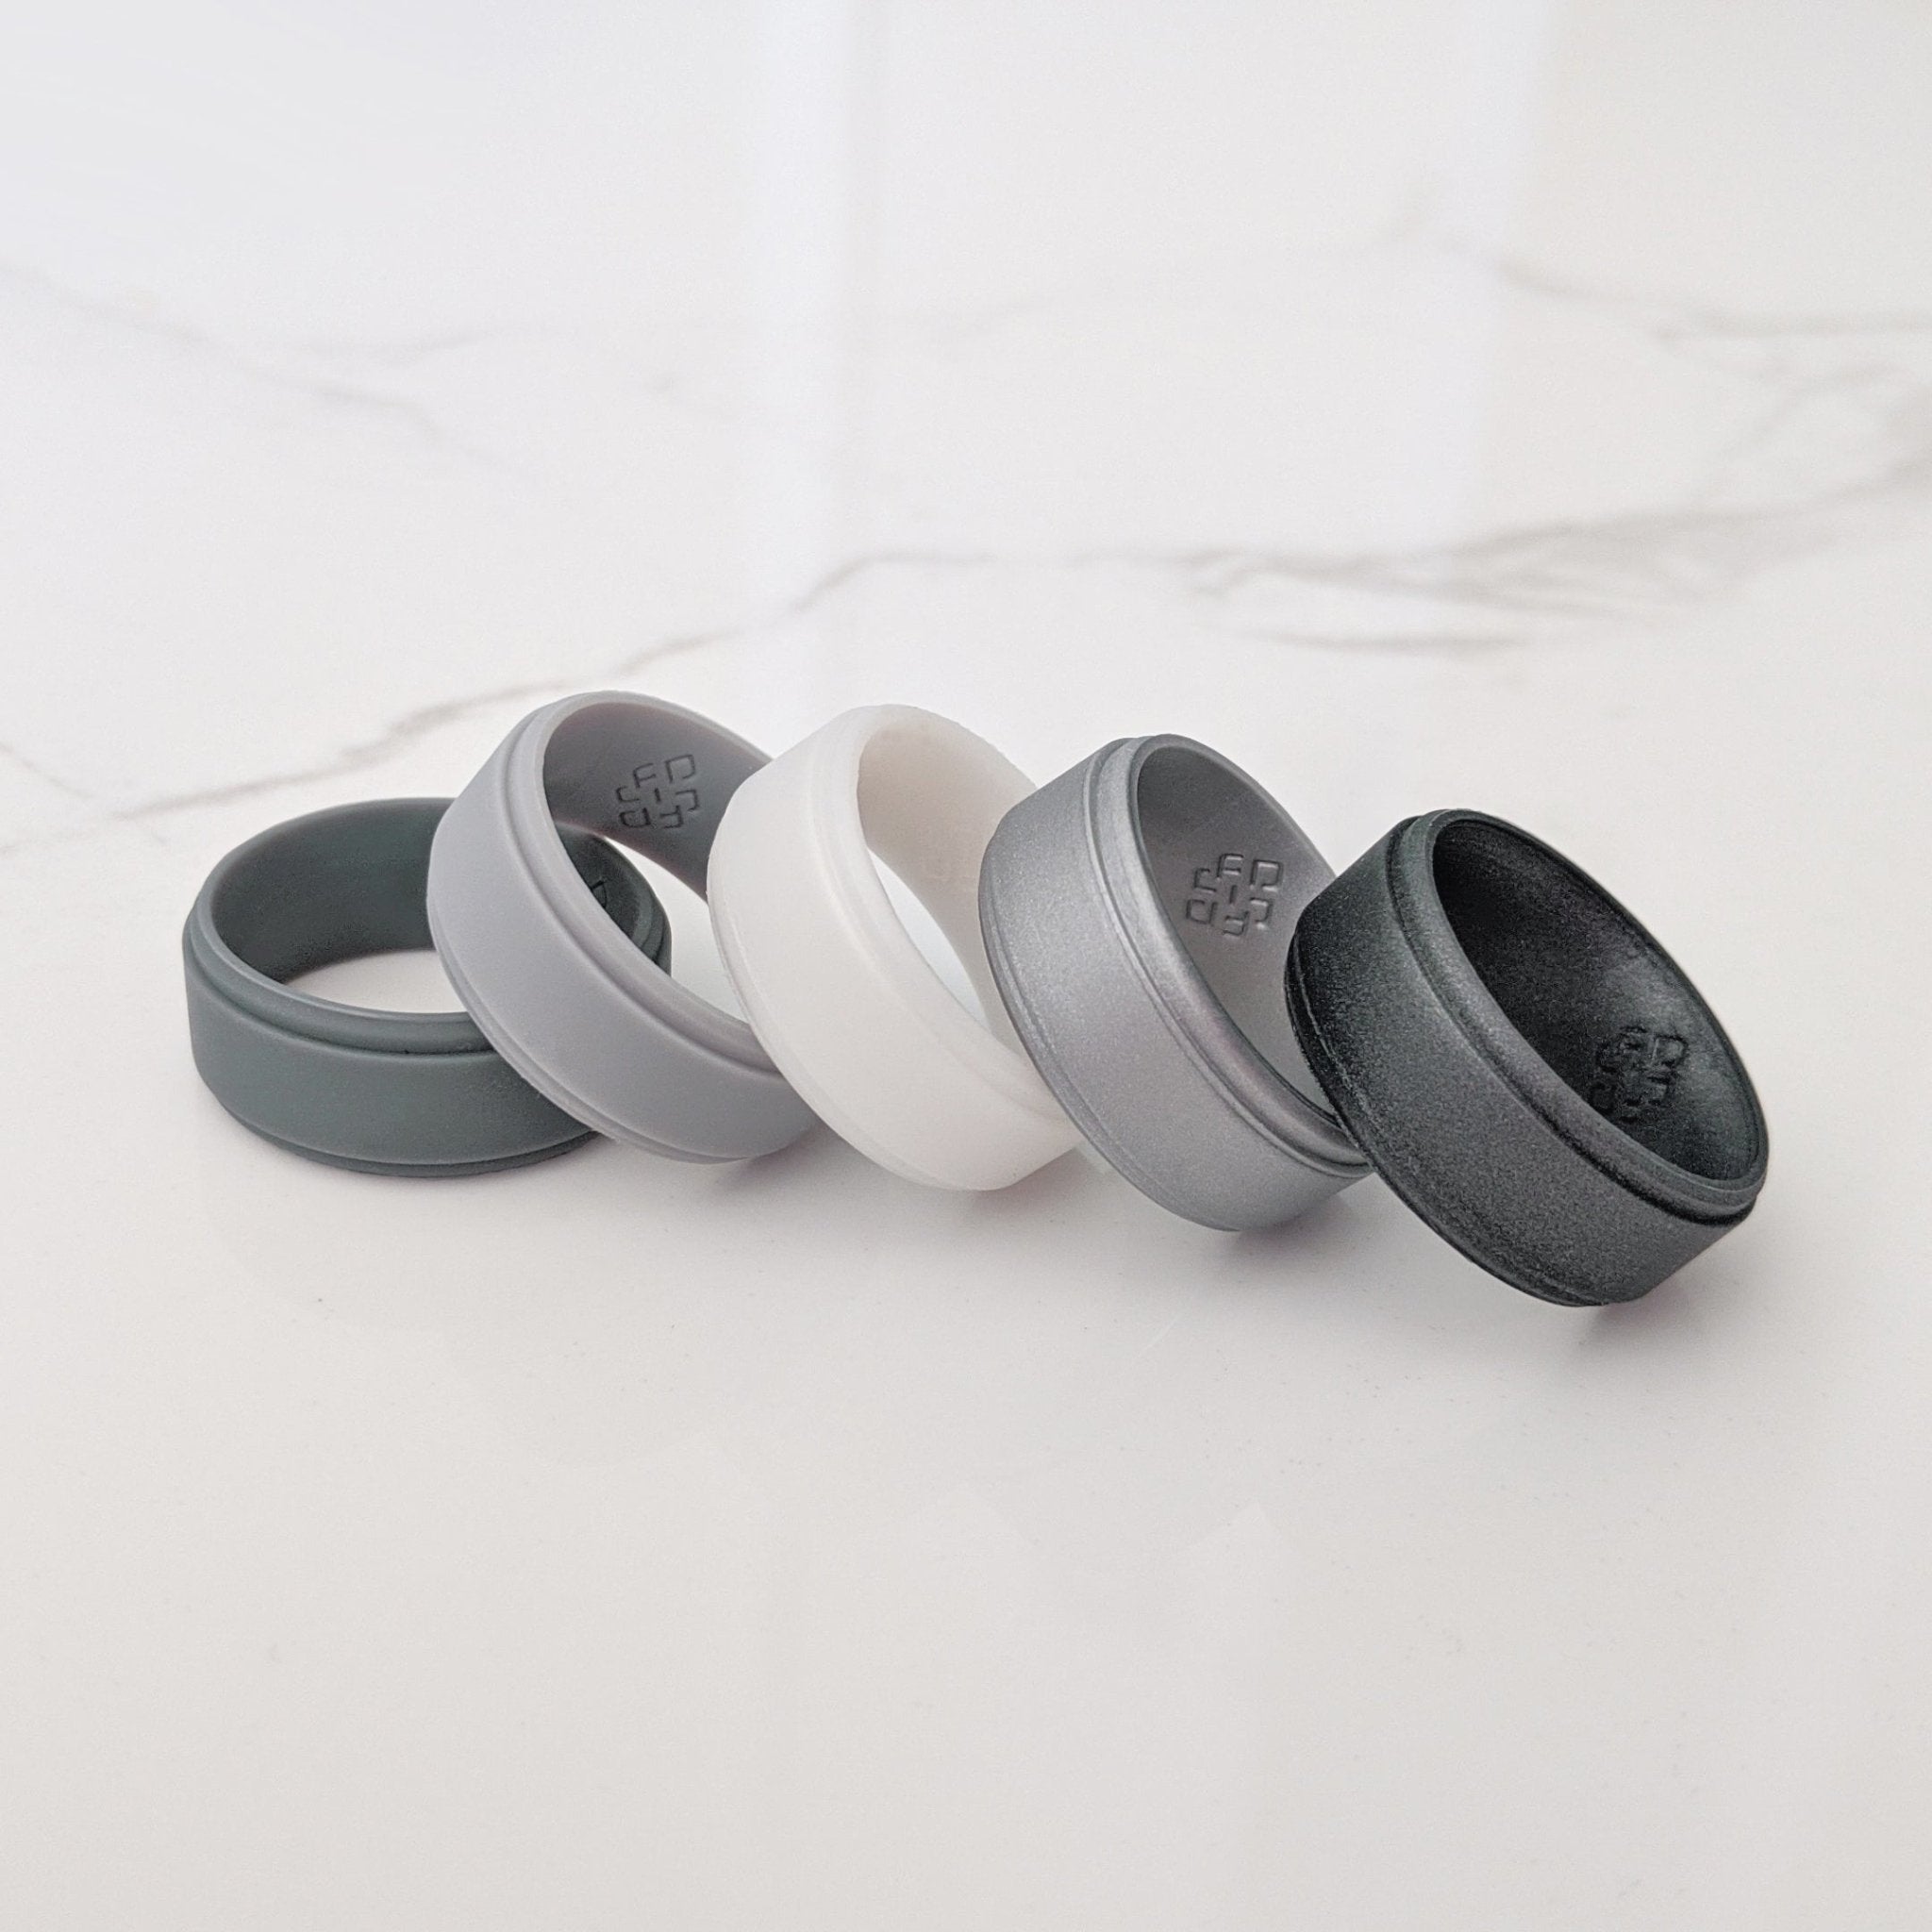 Silver Step Edge Breathable Silicone Ring for Men - Knot Theory